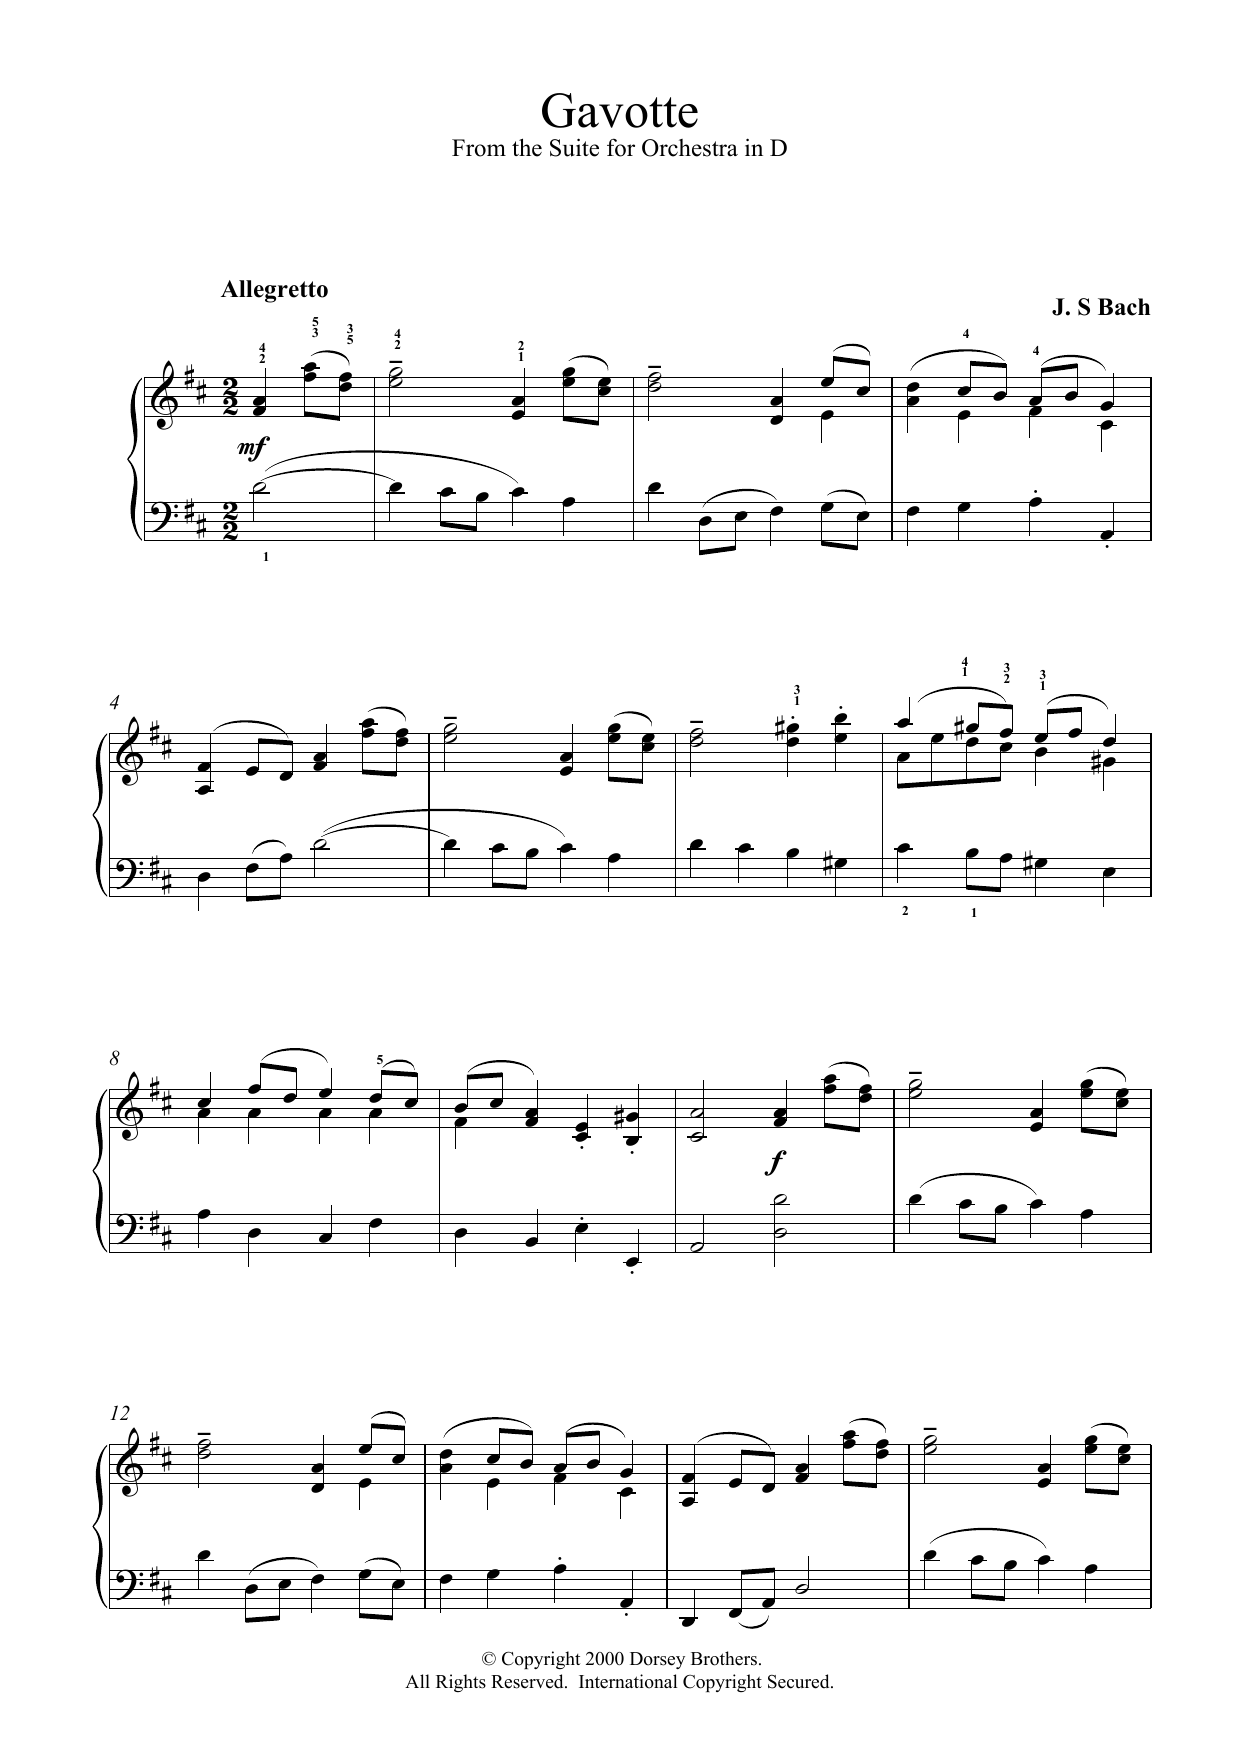 Johann Sebastian Bach Gavotte (from the Suite for Orchestra in D) sheet music notes and chords. Download Printable PDF.